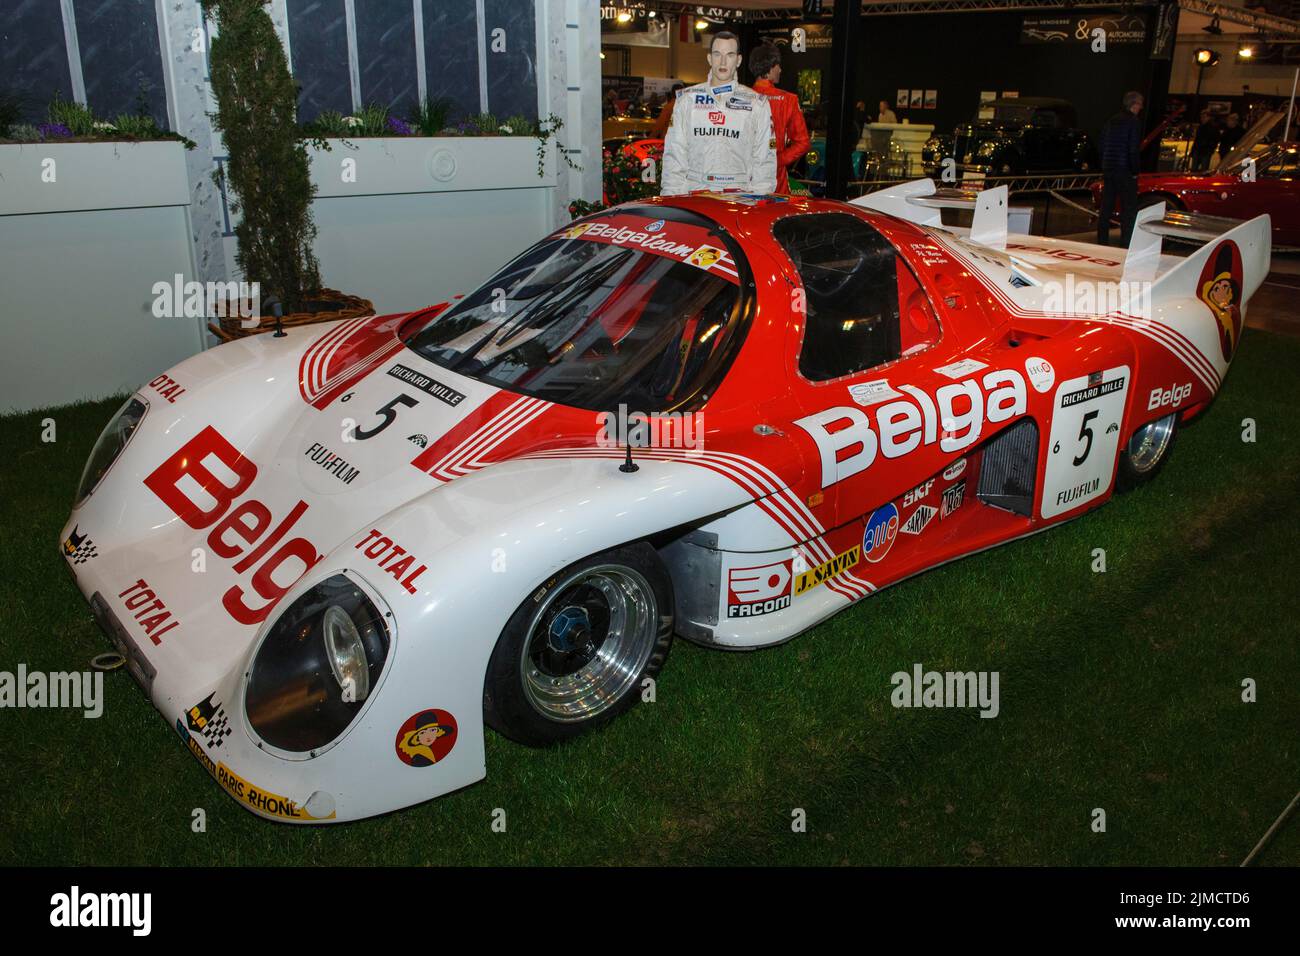 Historic classic racing car Rondeau M378 overall winner 24h Le Mans 1978, 24 hours race of Le Mans, Techno Classica fair, Essen, North Stock Photo